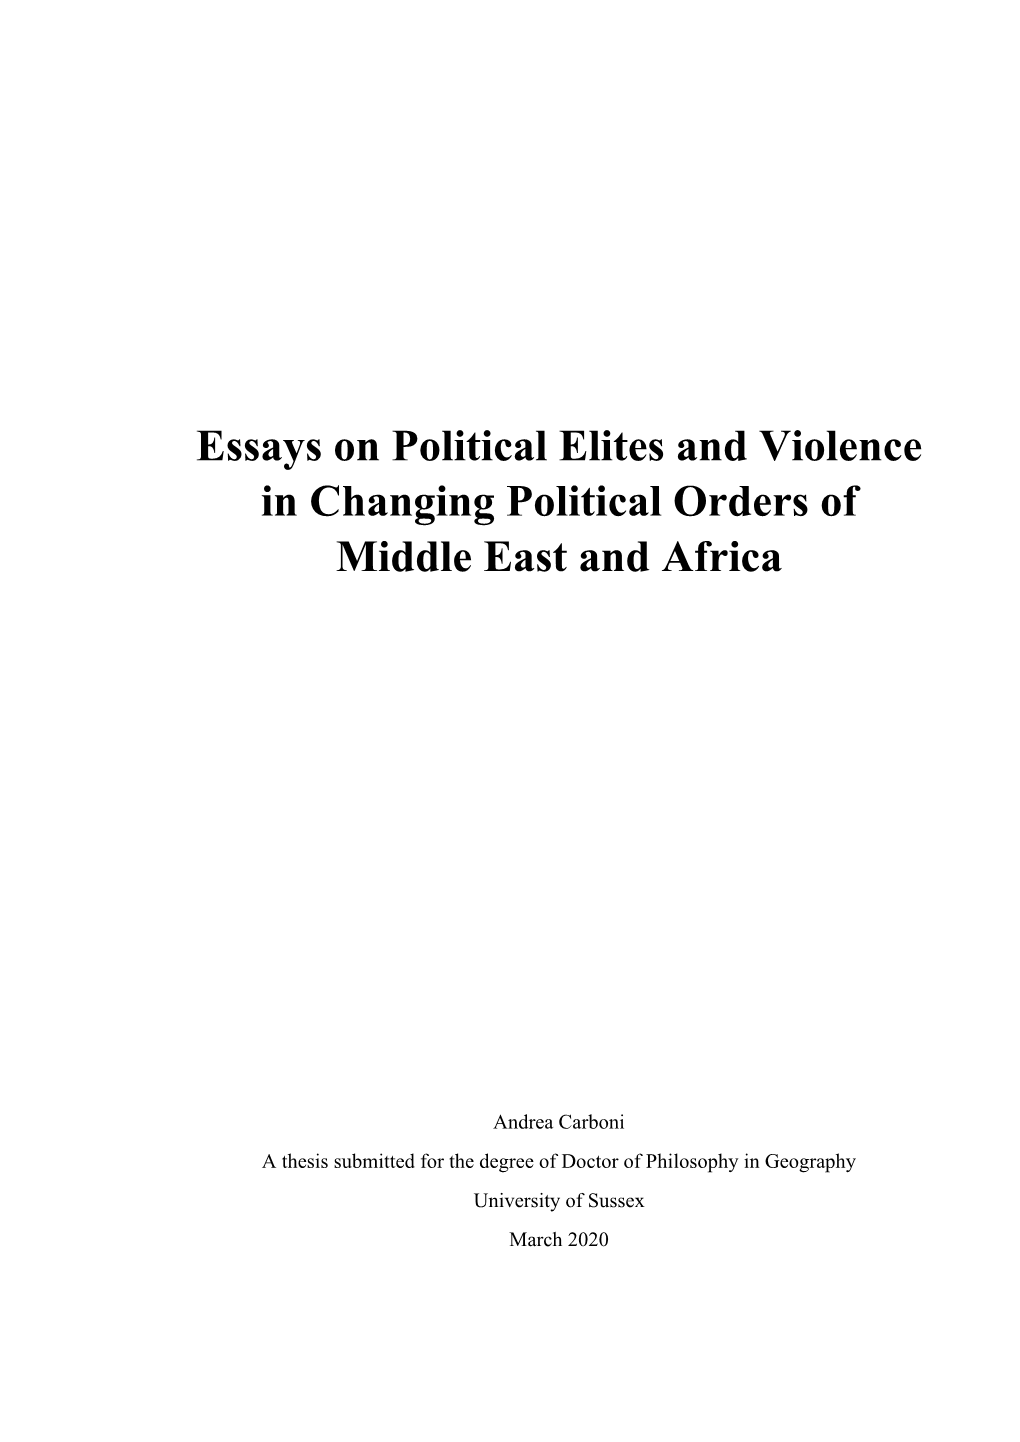 Essays on Political Elites and Violence in Changing Political Orders of Middle East and Africa